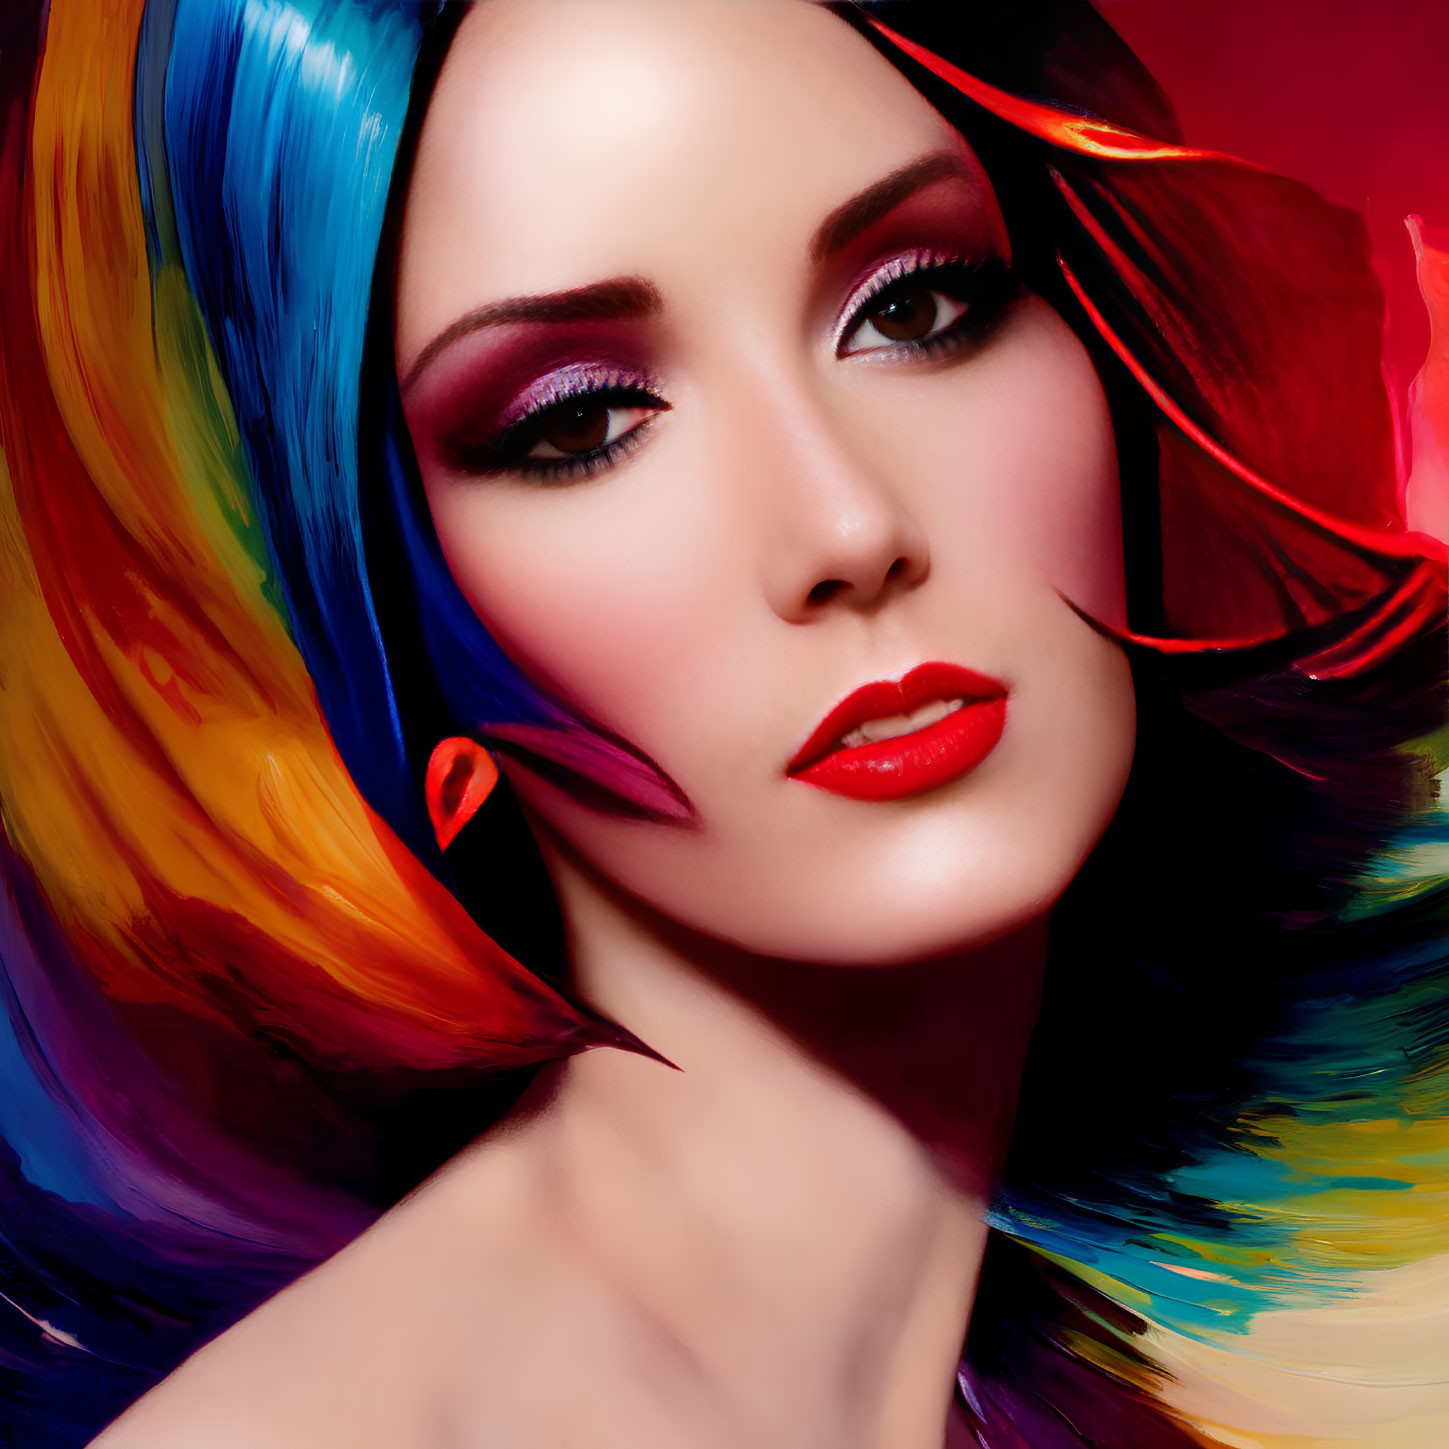 Vibrant rainbow-colored hair and red lipstick on a woman against red backdrop